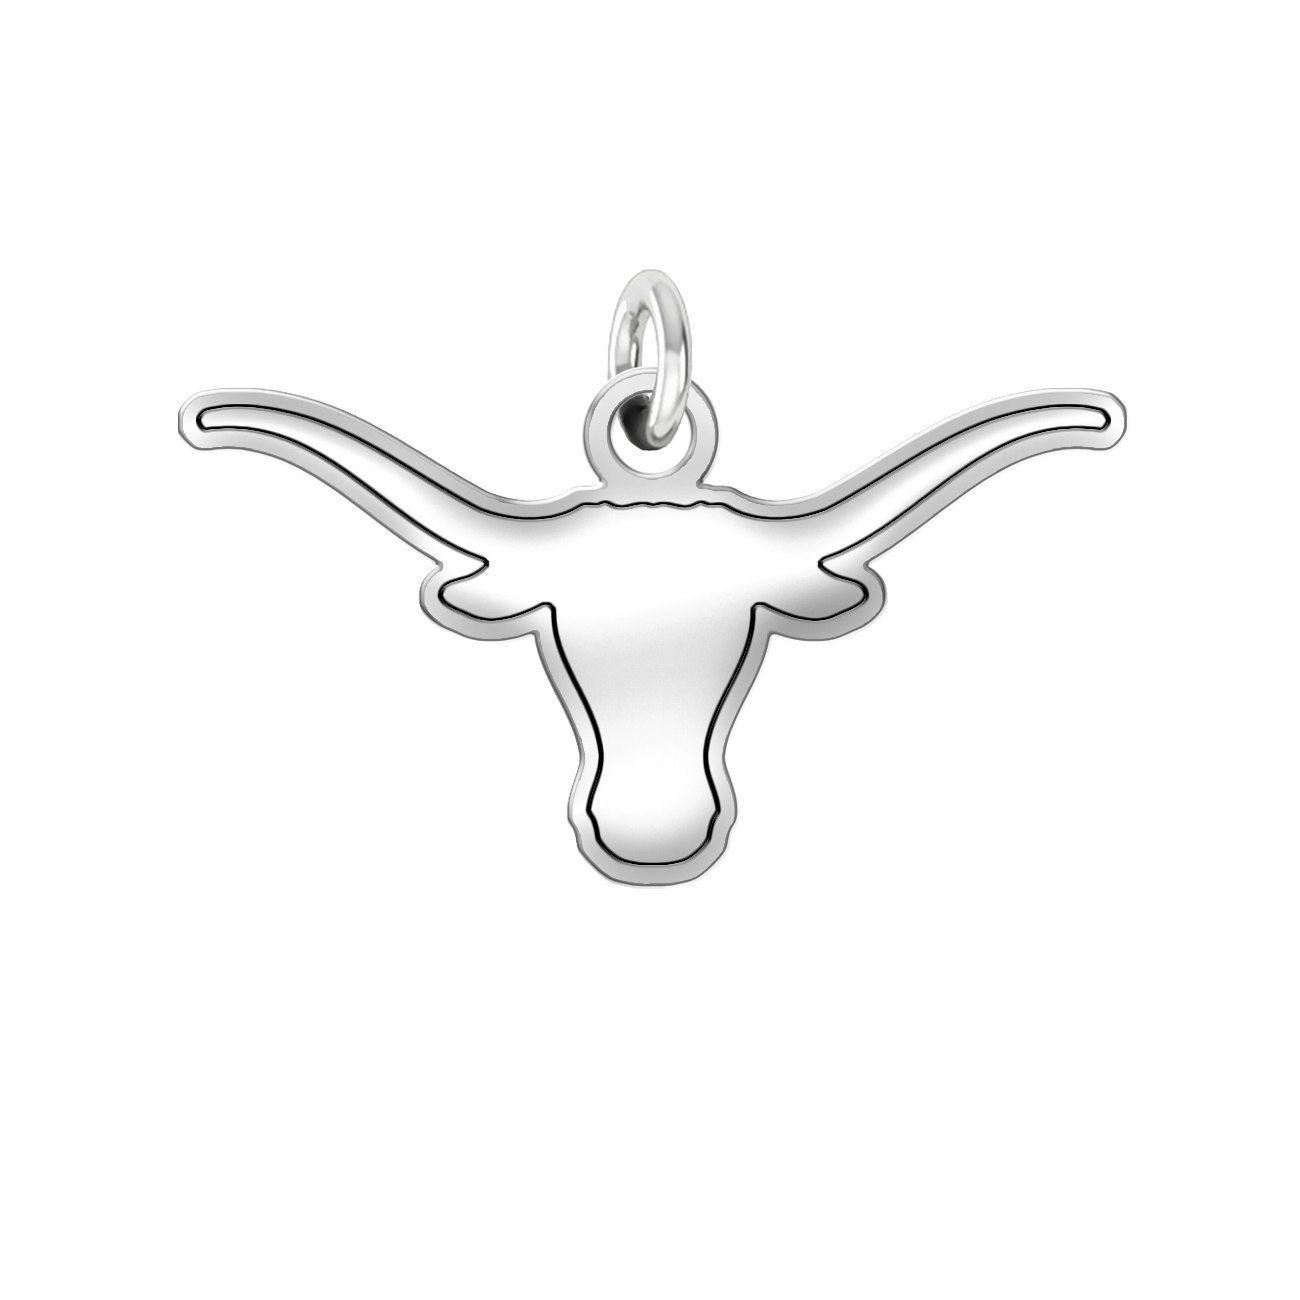 Black and White Longhorn Logo - College Jewelry Texas Longhorns Charm 4 Antique